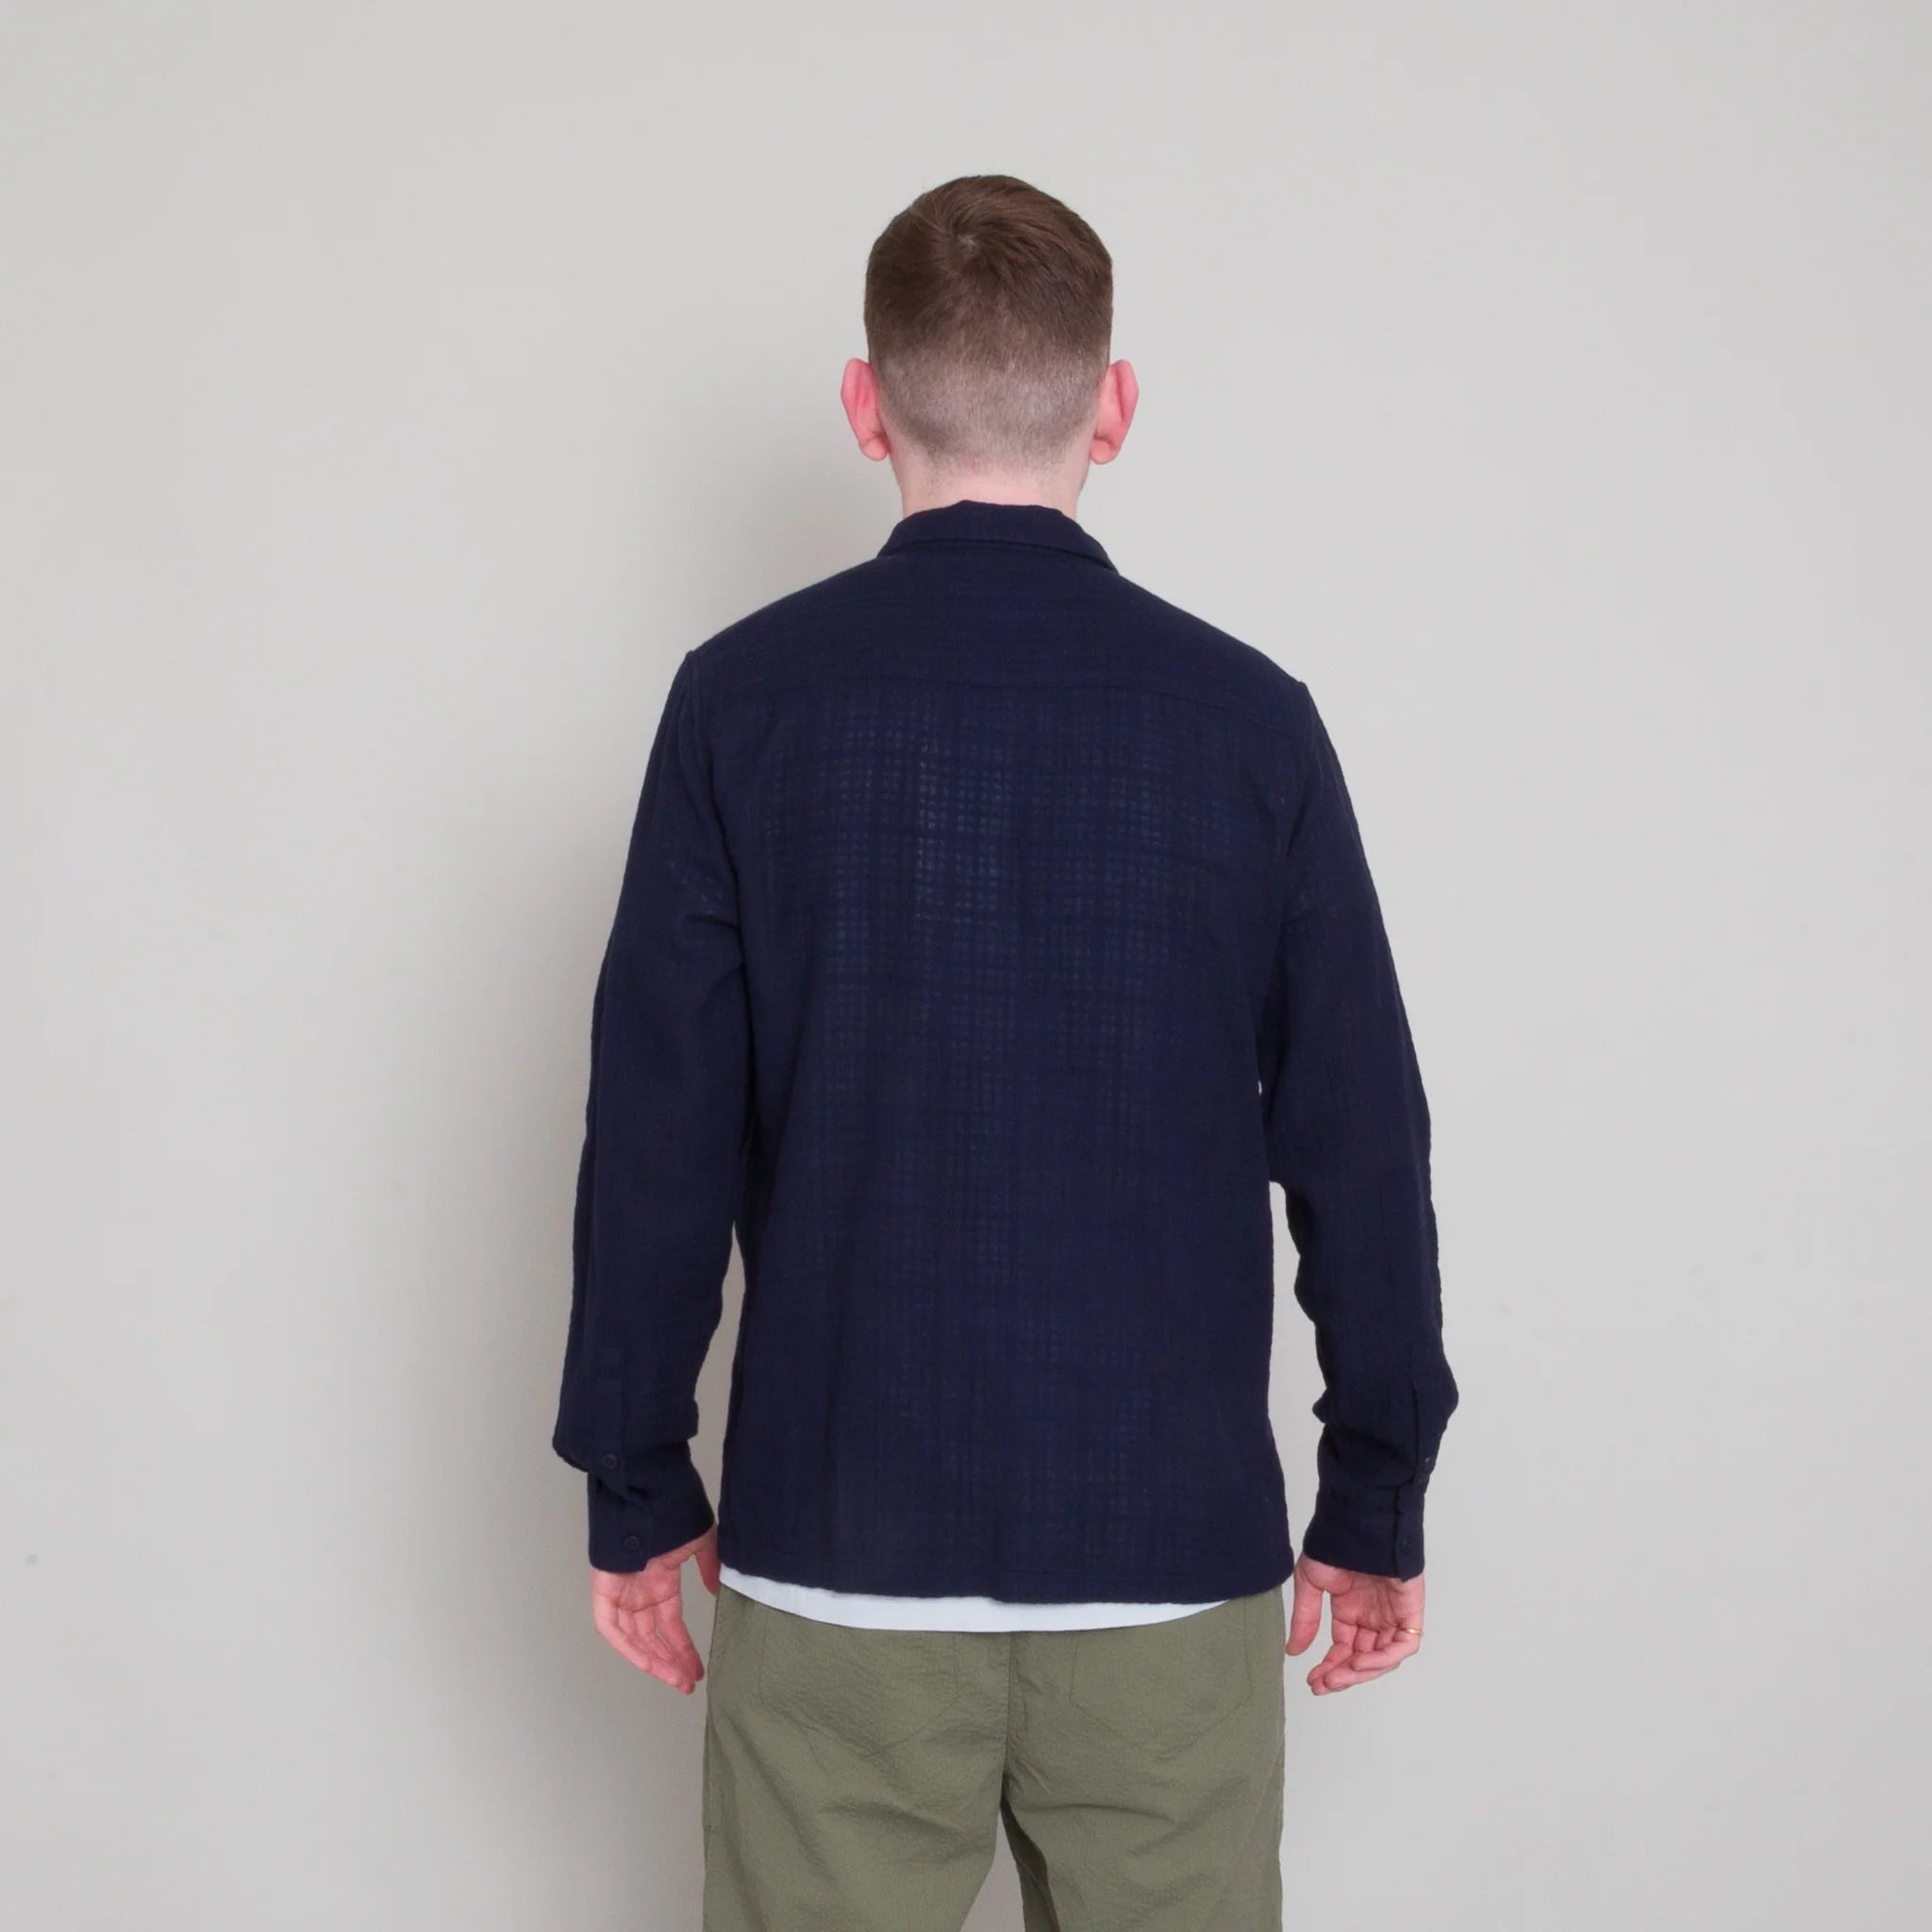 Patch Shirt - Navy Open Weave Check